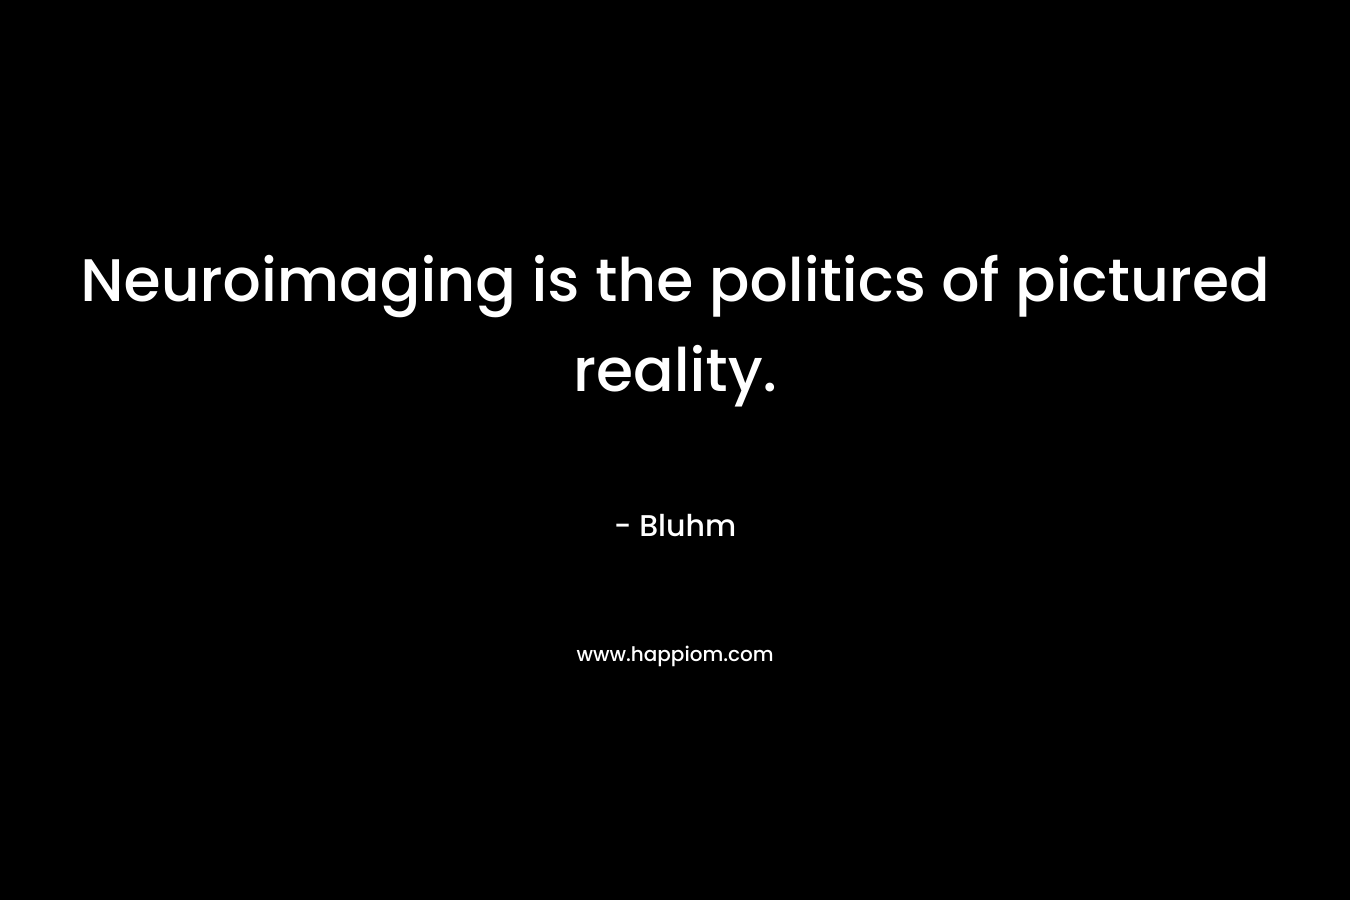 Neuroimaging is the politics of pictured reality. – Bluhm